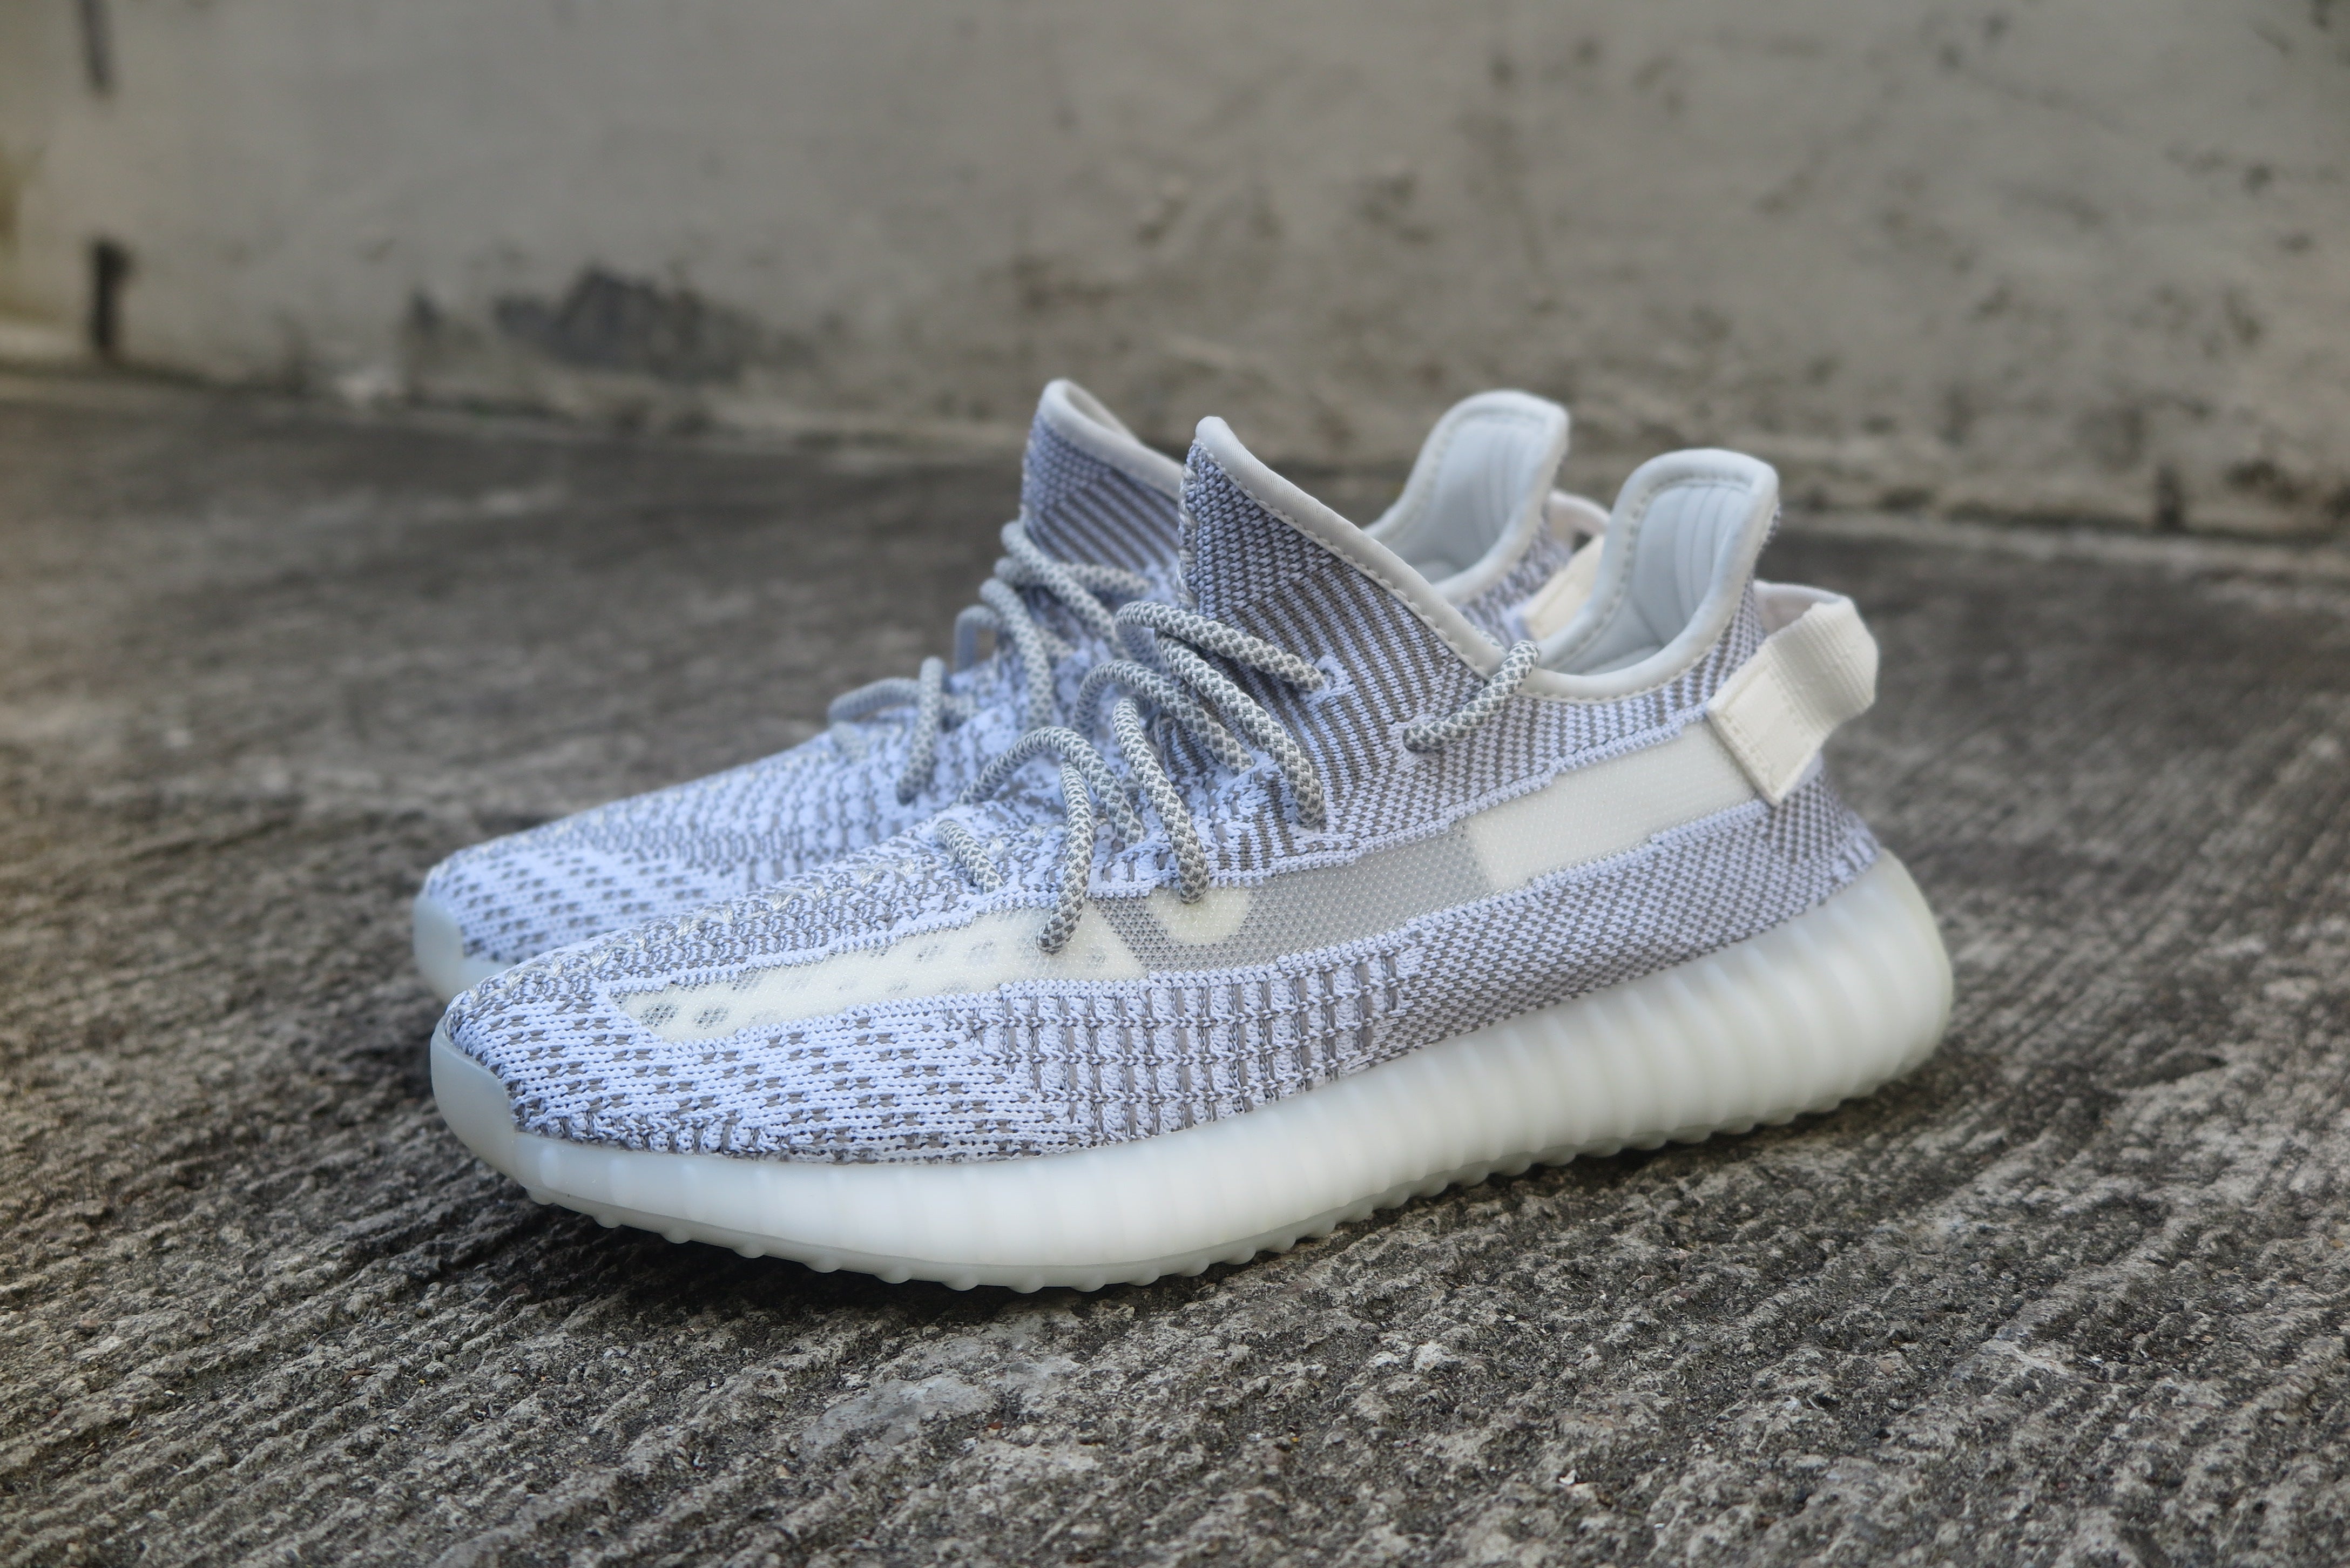 adidas Yeezy Boost 350 v2 - Static – Navy Selected